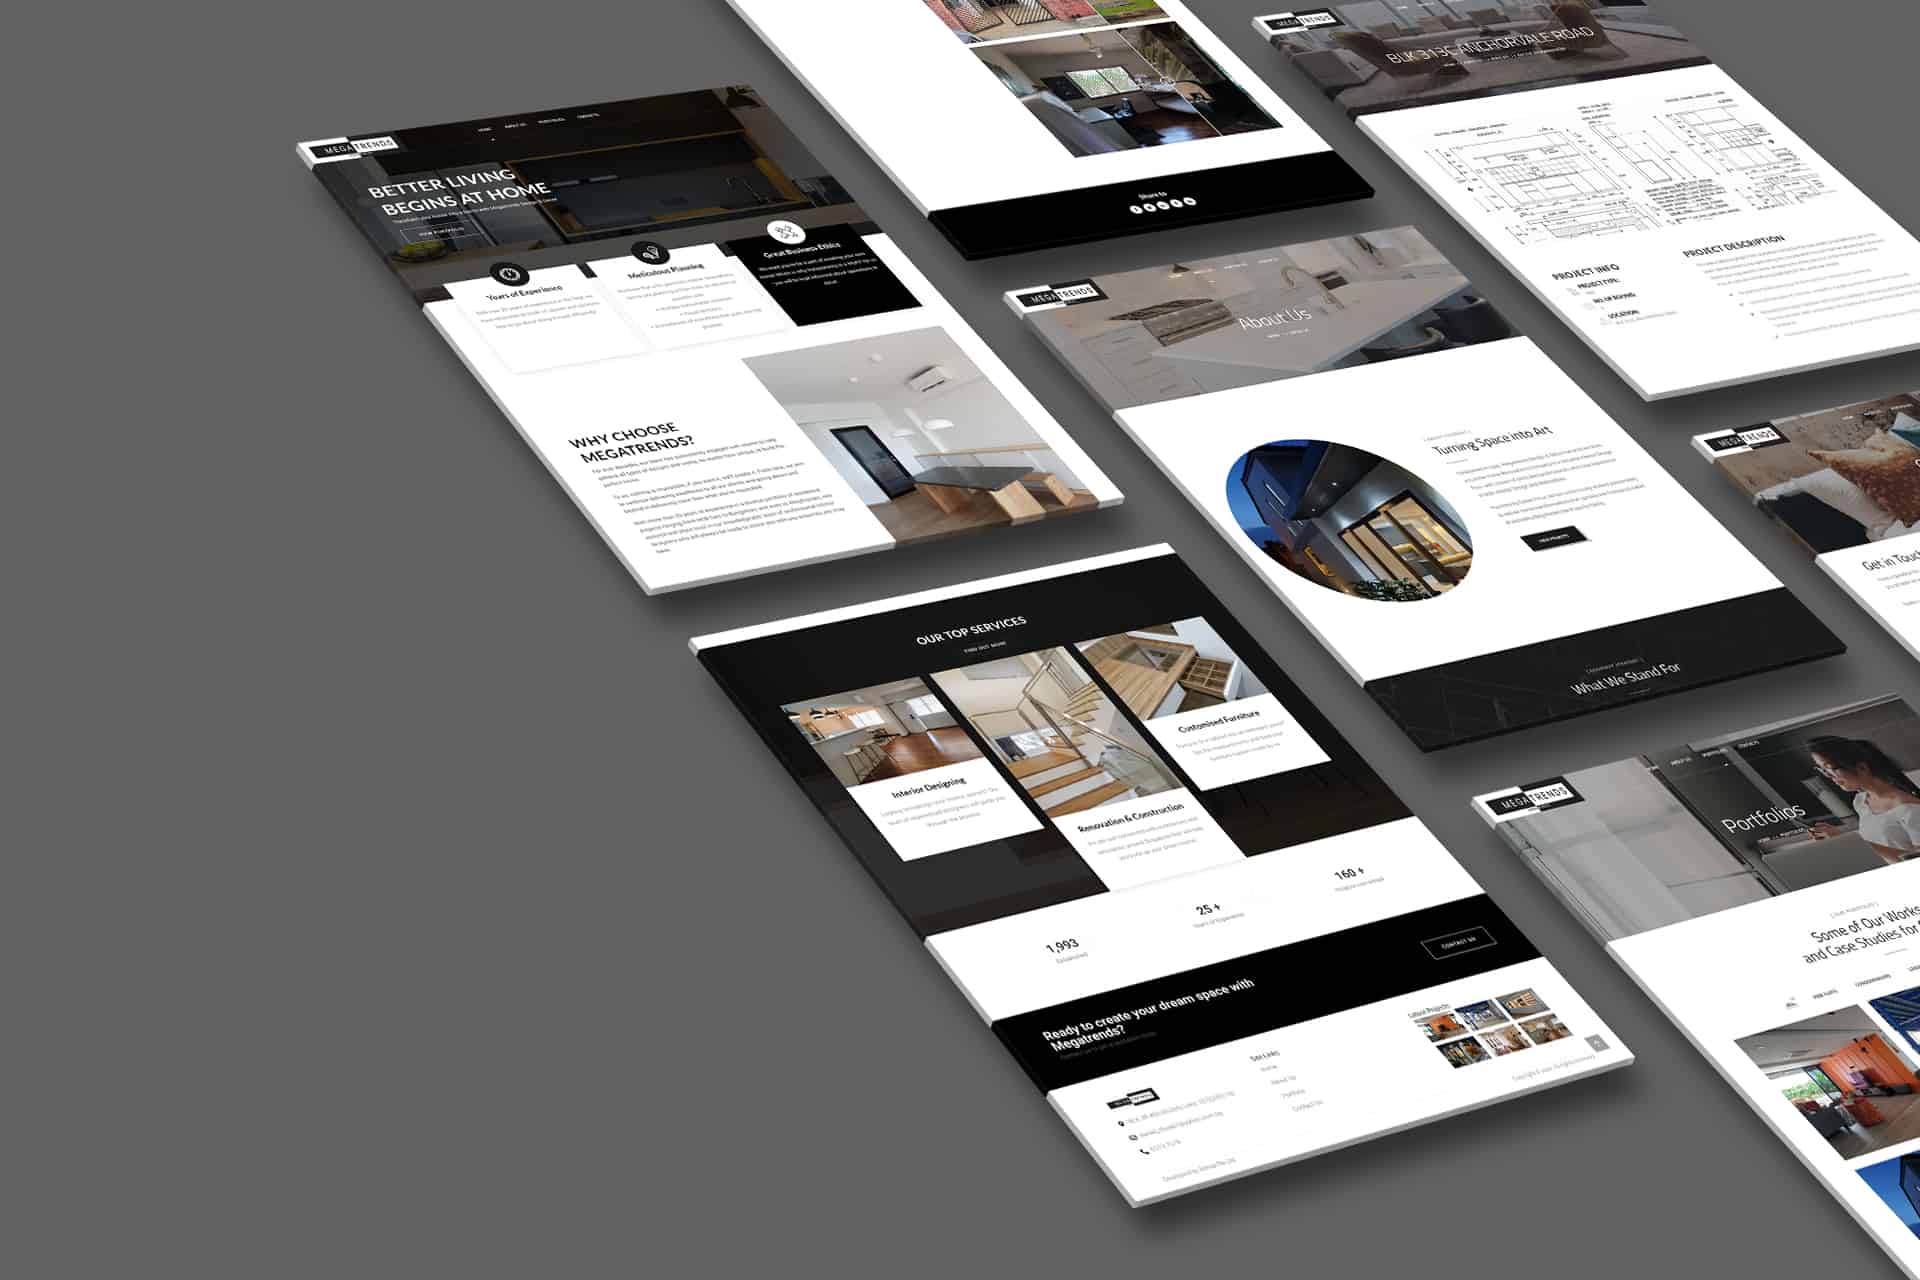 A black and white layout for a WordPress portfolio website, with options for web consultation.